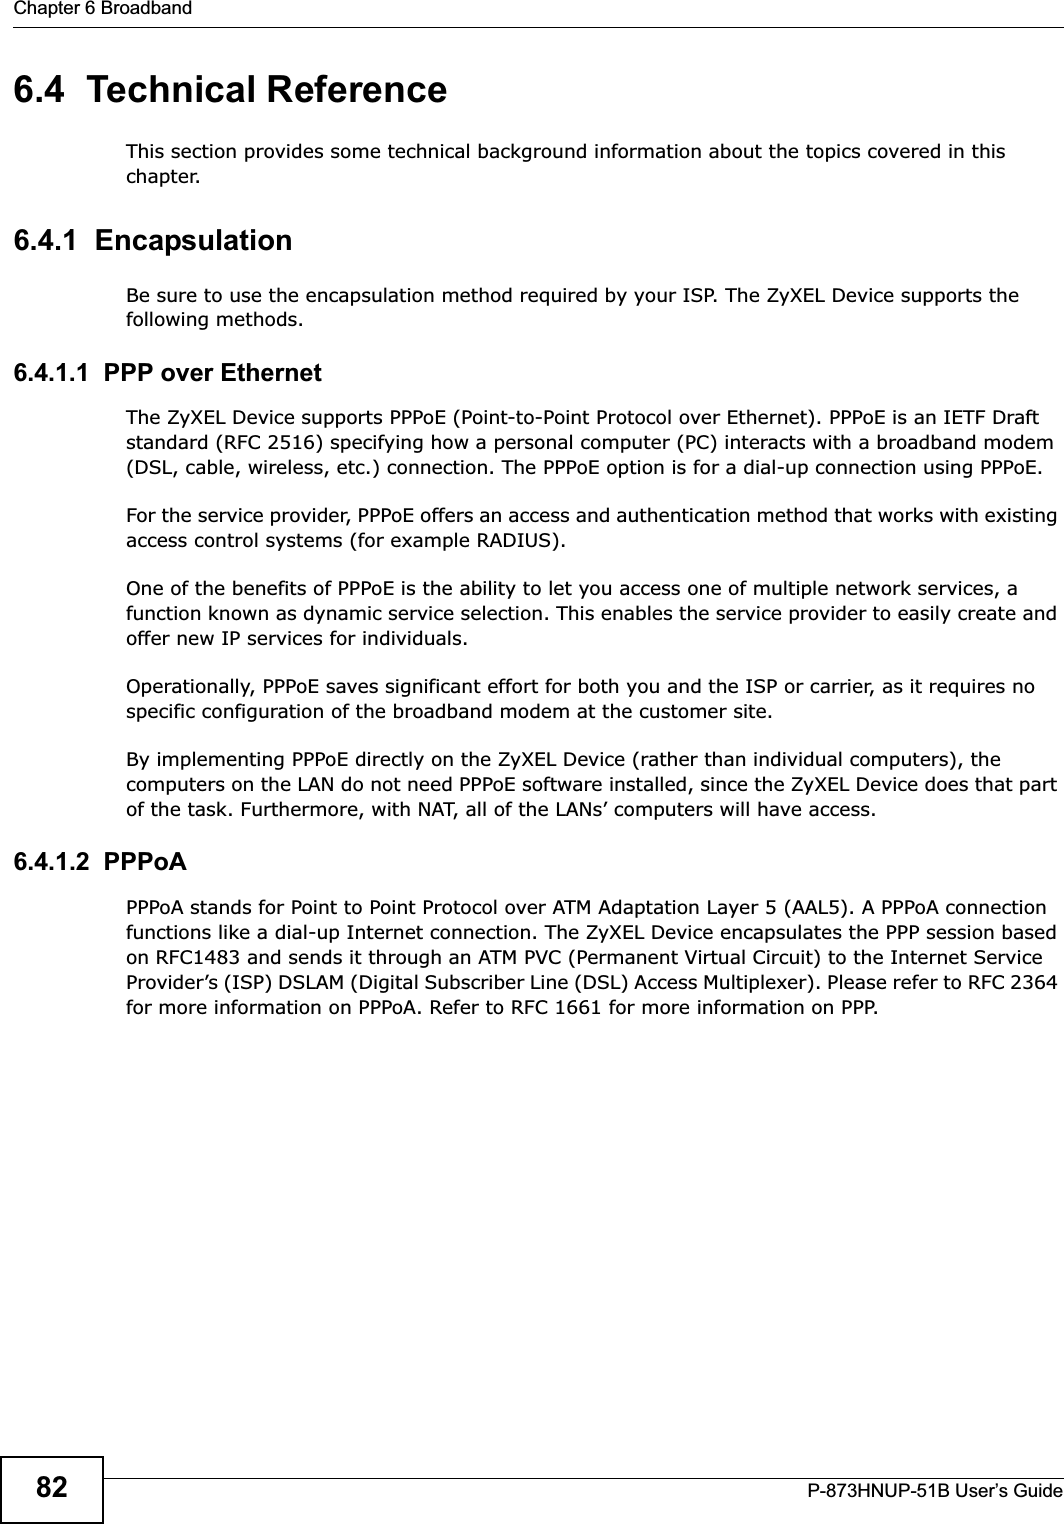 Chapter 6 BroadbandP-873HNUP-51B User’s Guide826.4  Technical ReferenceThis section provides some technical background information about the topics covered in this chapter.6.4.1  EncapsulationBe sure to use the encapsulation method required by your ISP. The ZyXEL Device supports the following methods.6.4.1.1  PPP over EthernetThe ZyXEL Device supports PPPoE (Point-to-Point Protocol over Ethernet). PPPoE is an IETF Draft standard (RFC 2516) specifying how a personal computer (PC) interacts with a broadband modem (DSL, cable, wireless, etc.) connection. The PPPoE option is for a dial-up connection using PPPoE.For the service provider, PPPoE offers an access and authentication method that works with existing access control systems (for example RADIUS).One of the benefits of PPPoE is the ability to let you access one of multiple network services, a function known as dynamic service selection. This enables the service provider to easily create and offer new IP services for individuals.Operationally, PPPoE saves significant effort for both you and the ISP or carrier, as it requires no specific configuration of the broadband modem at the customer site.By implementing PPPoE directly on the ZyXEL Device (rather than individual computers), the computers on the LAN do not need PPPoE software installed, since the ZyXEL Device does that part of the task. Furthermore, with NAT, all of the LANs’ computers will have access.6.4.1.2  PPPoAPPPoA stands for Point to Point Protocol over ATM Adaptation Layer 5 (AAL5). A PPPoA connection functions like a dial-up Internet connection. The ZyXEL Device encapsulates the PPP session based on RFC1483 and sends it through an ATM PVC (Permanent Virtual Circuit) to the Internet Service Provider’s (ISP) DSLAM (Digital Subscriber Line (DSL) Access Multiplexer). Please refer to RFC 2364 for more information on PPPoA. Refer to RFC 1661 for more information on PPP.